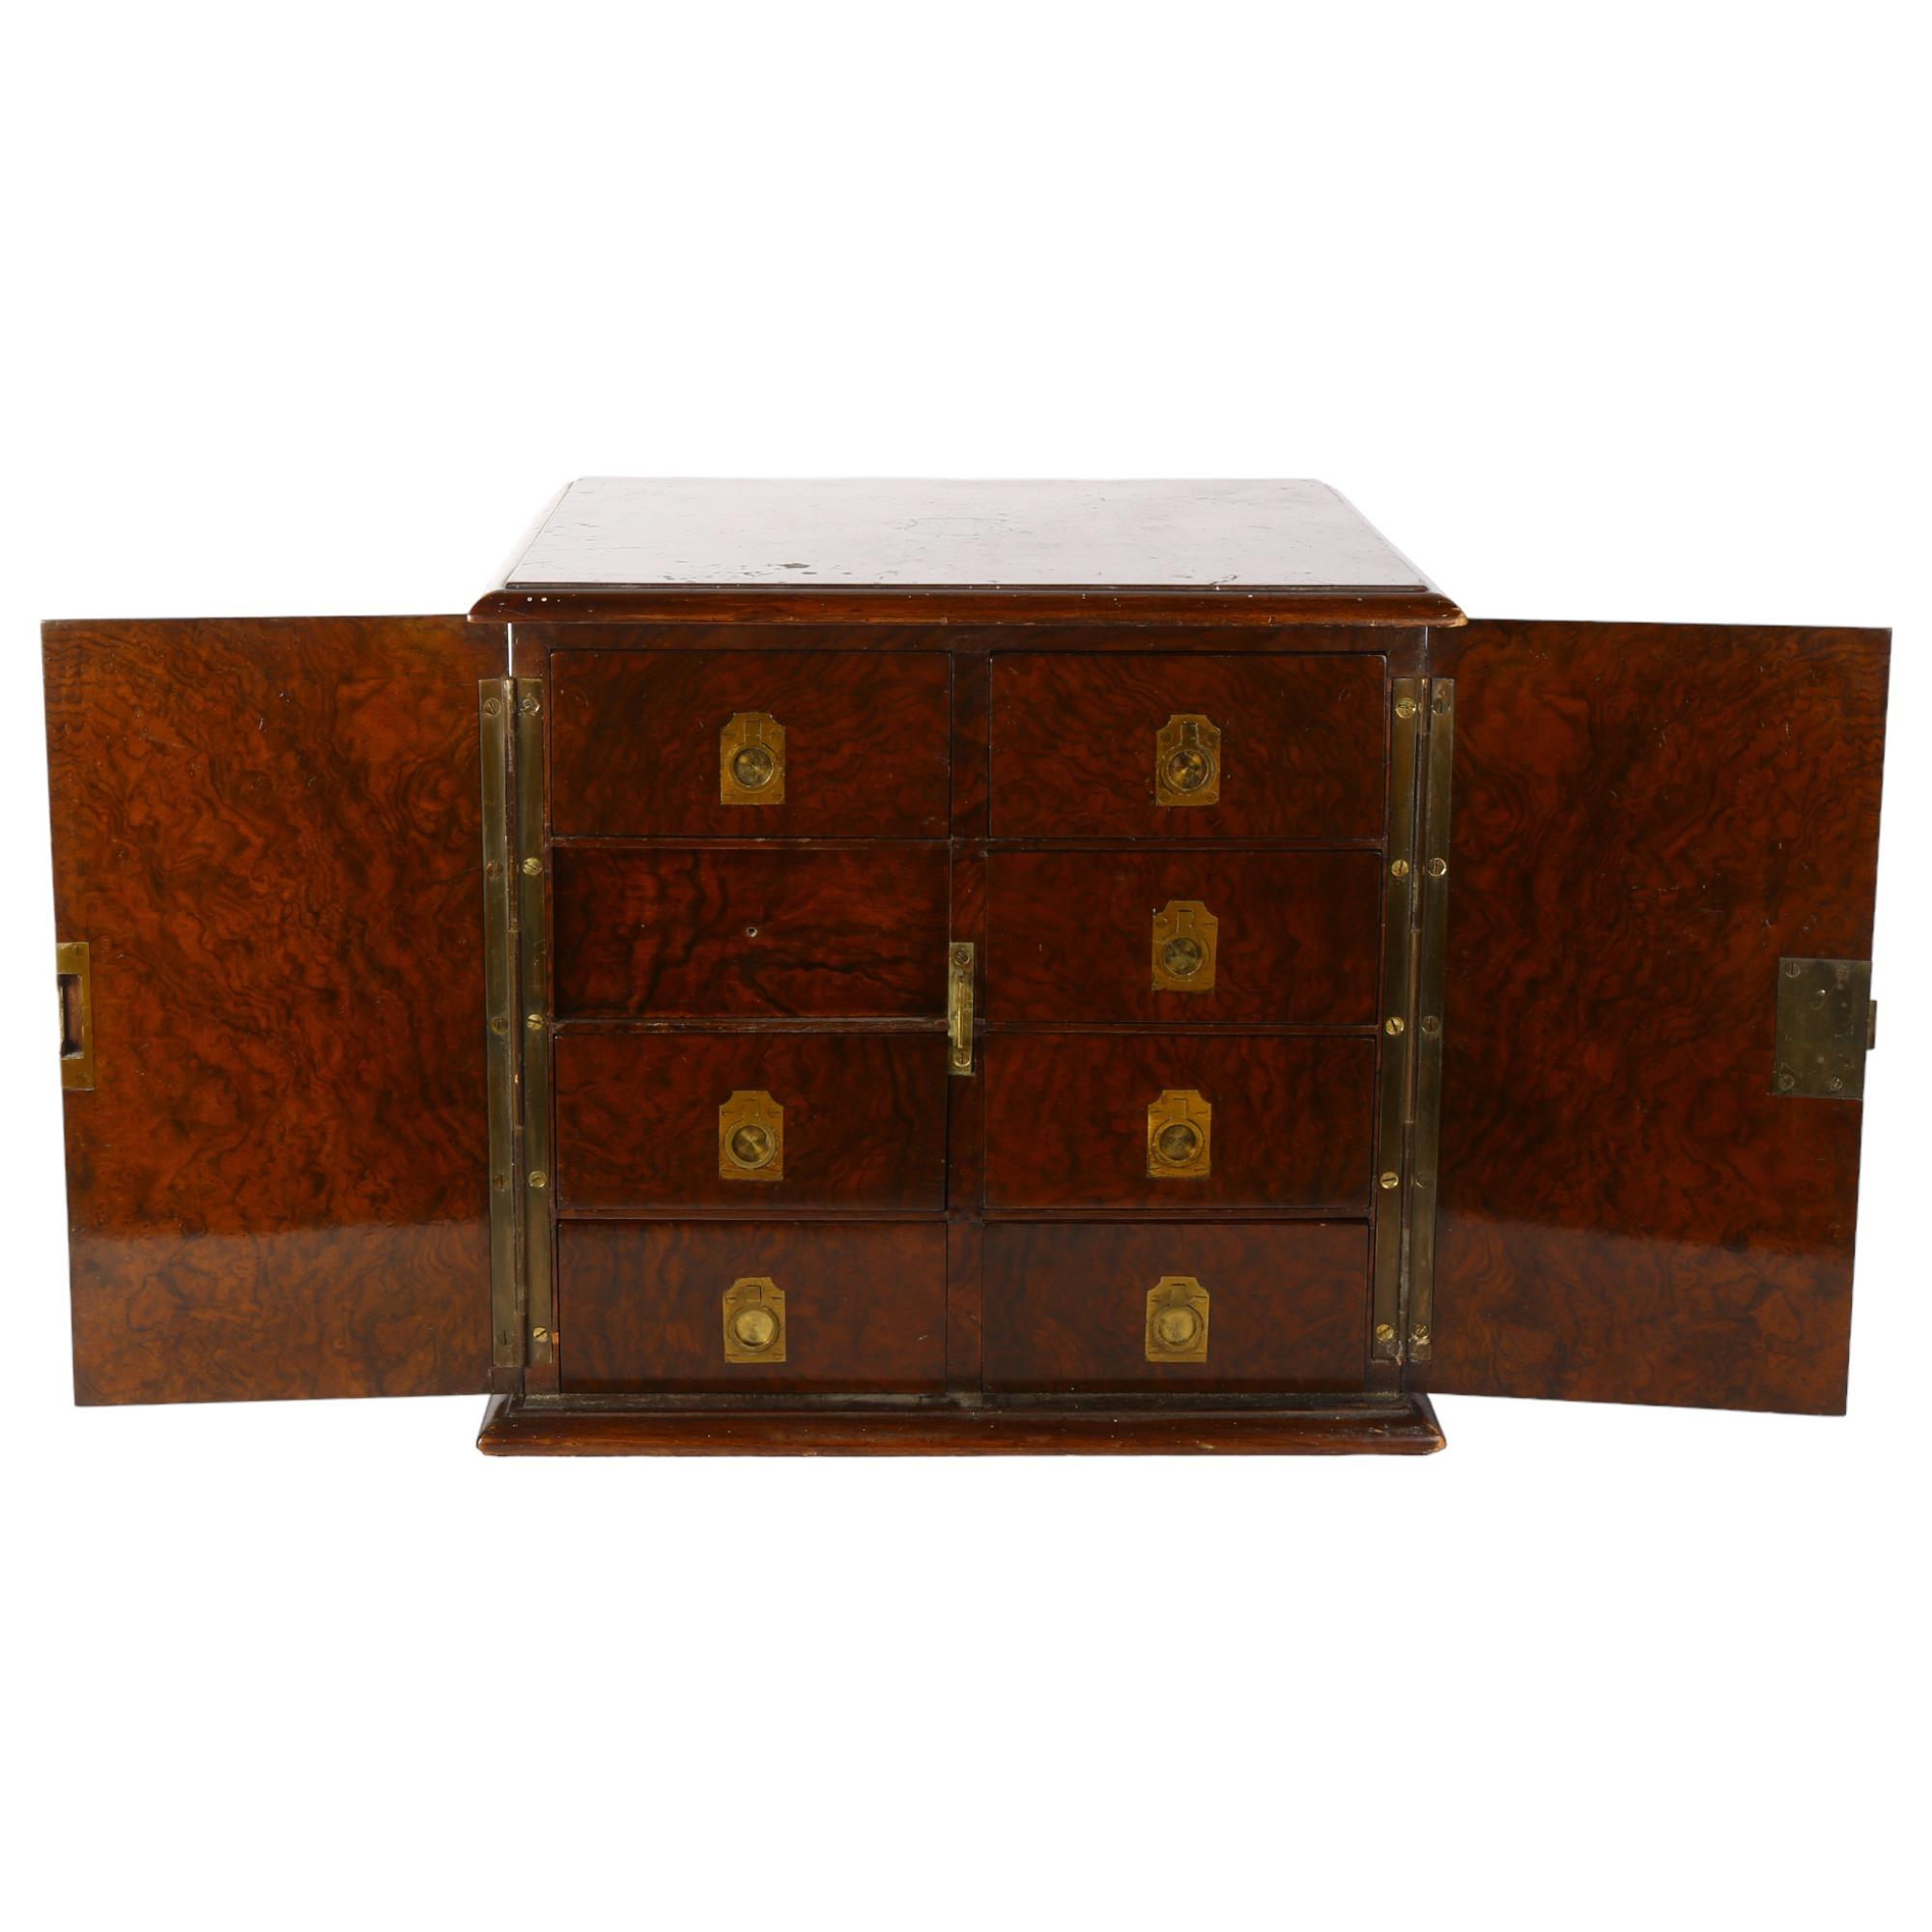 A Victorian burr-walnut table-top collector's cabinet, the 2 doors opening to reveal 8 short